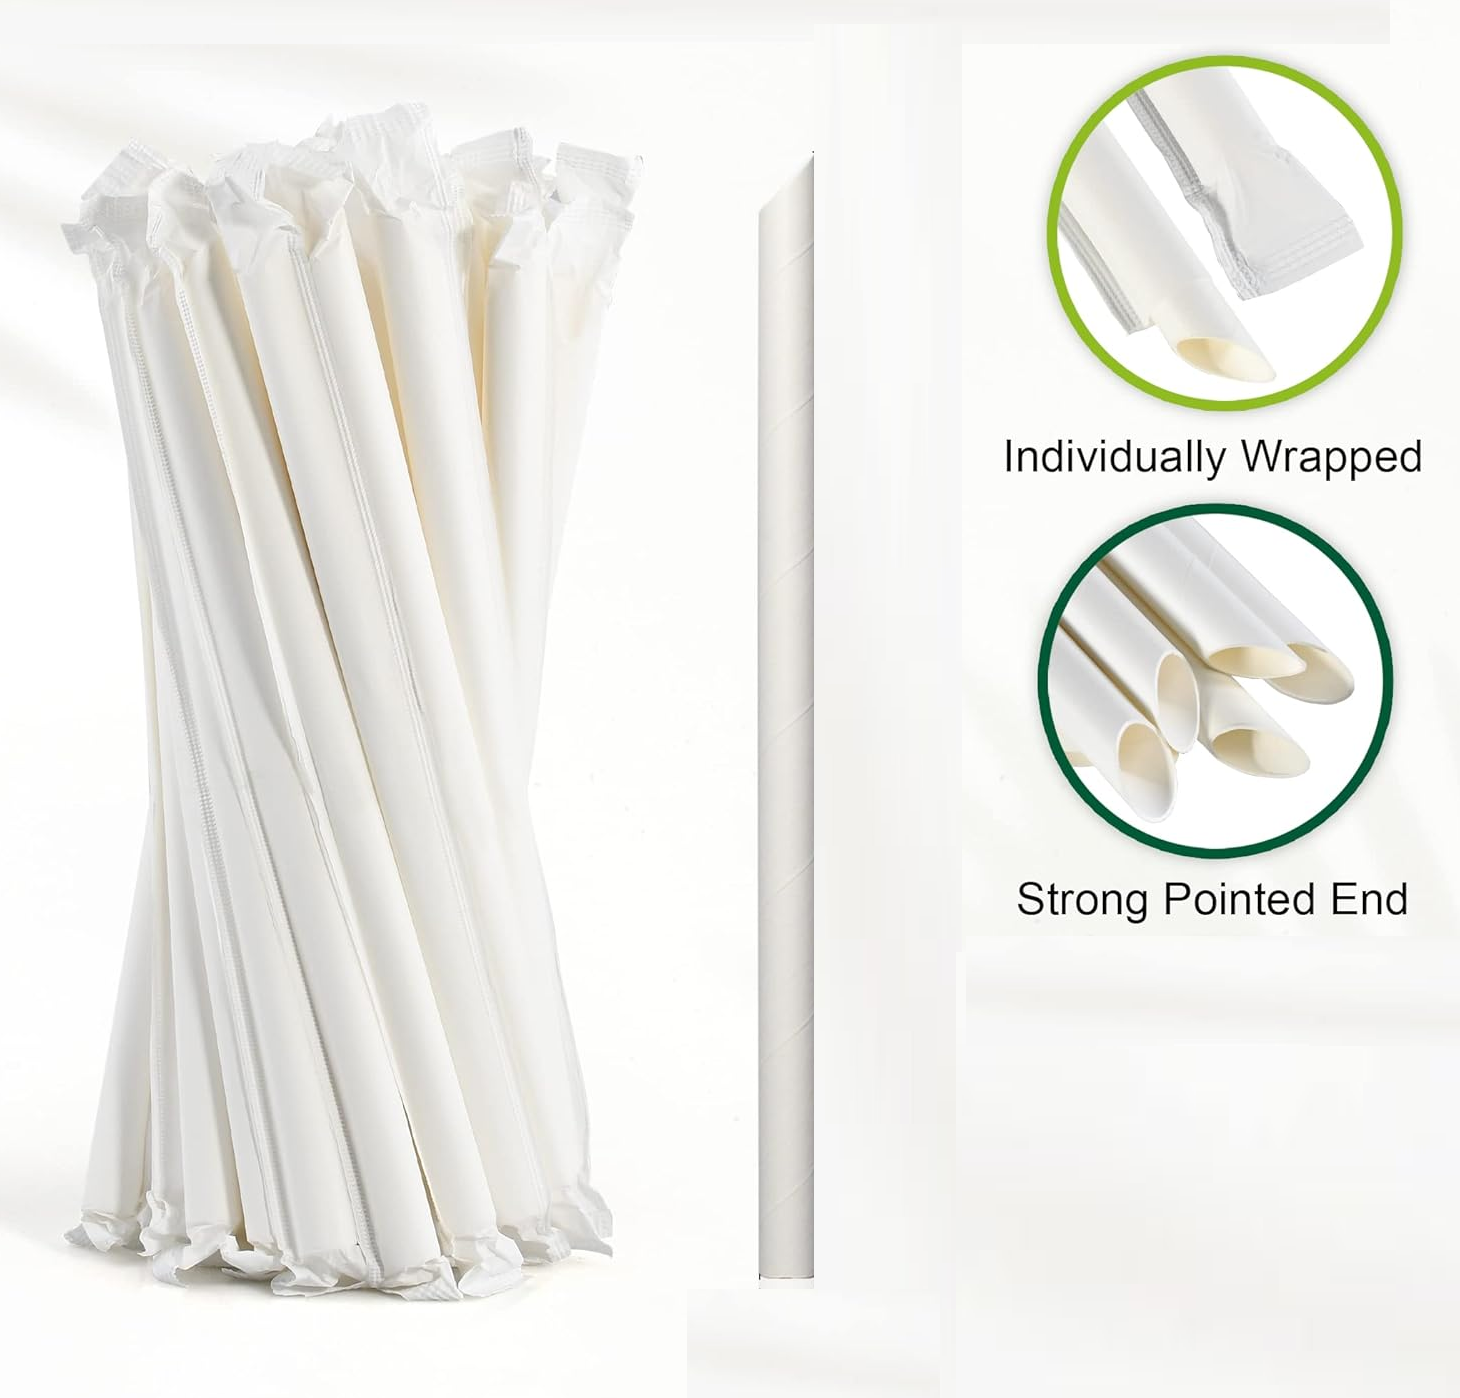 12MM X 210MM WPRAPPED BOBA WHITE PAPER STRAWS WITH